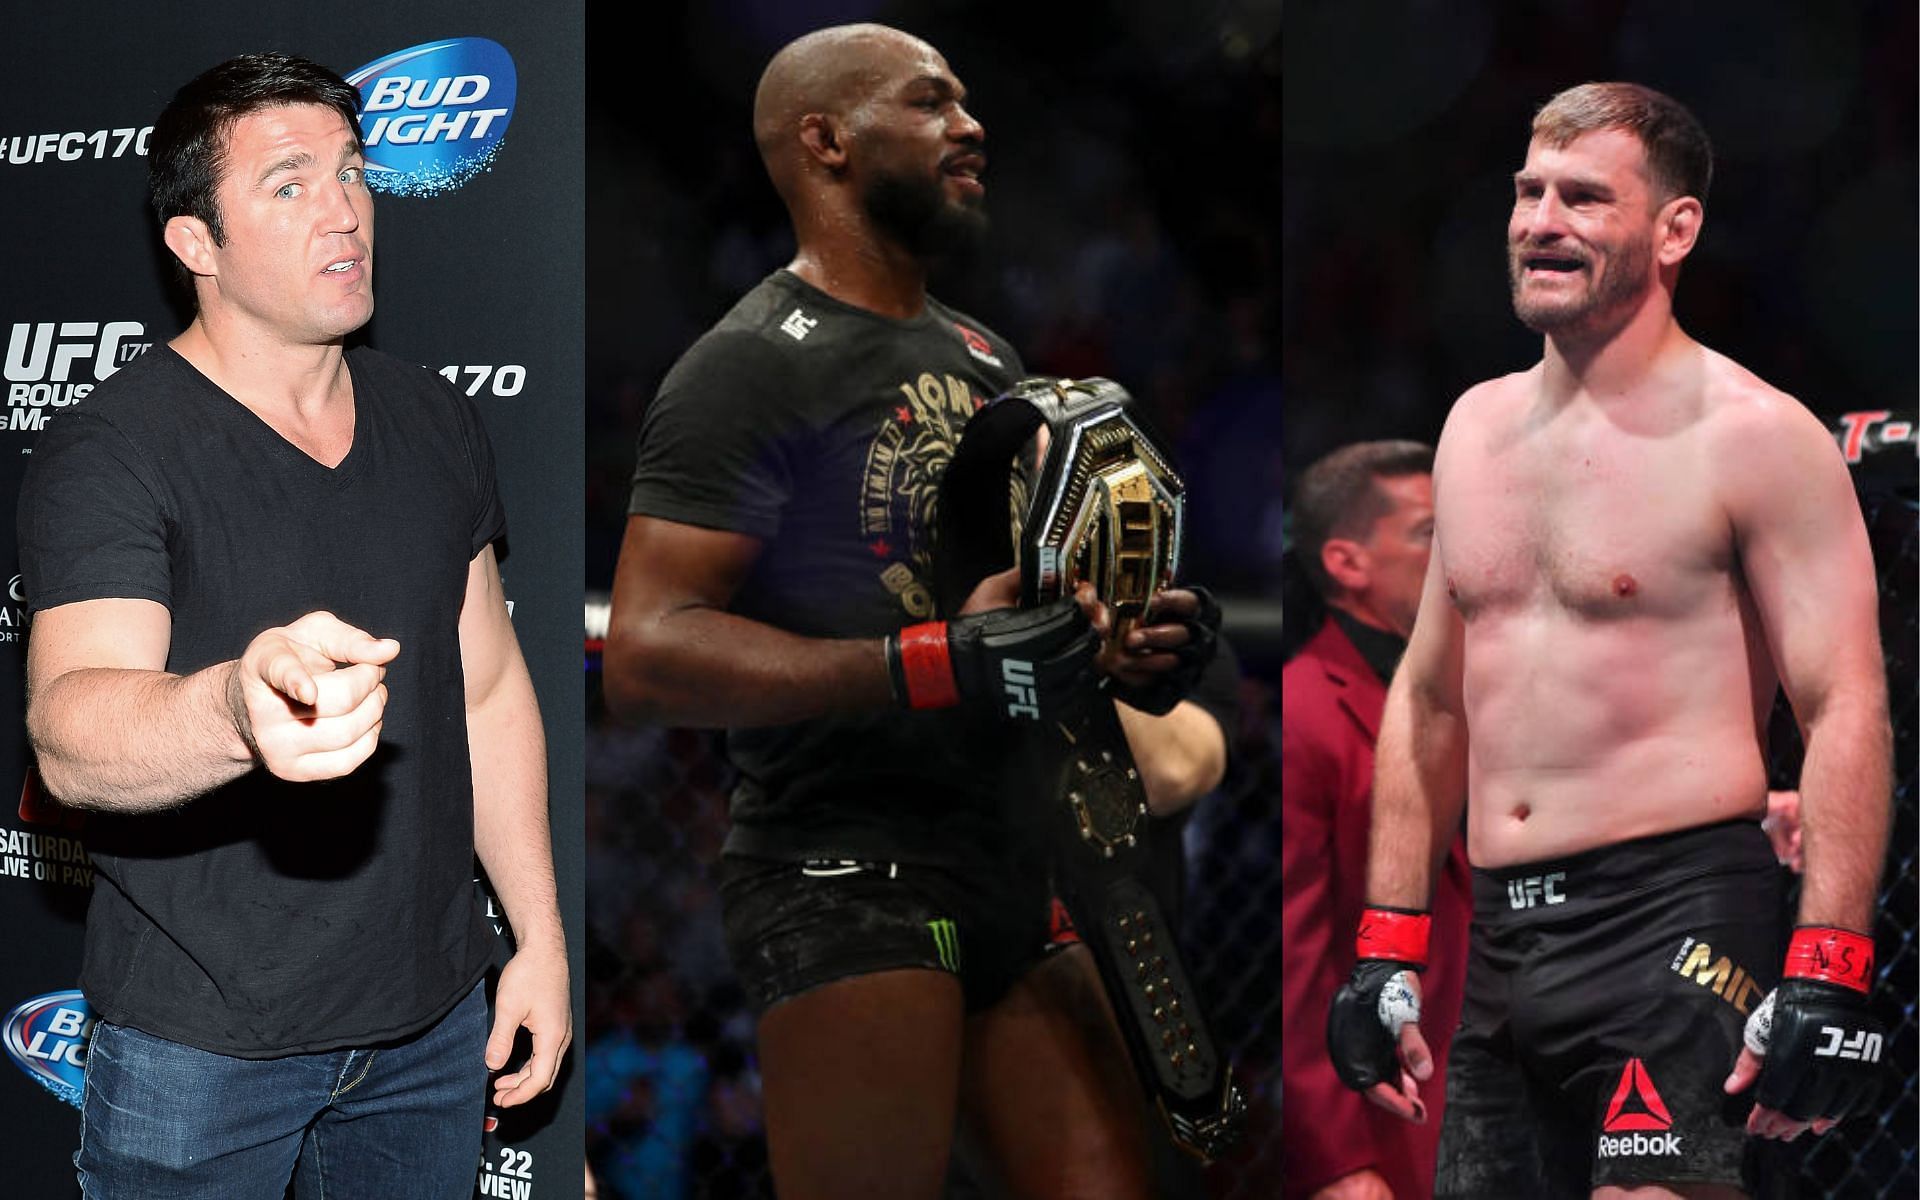 From left to right: Chael Sonnen, Jon Jones, and Stipe Miocic